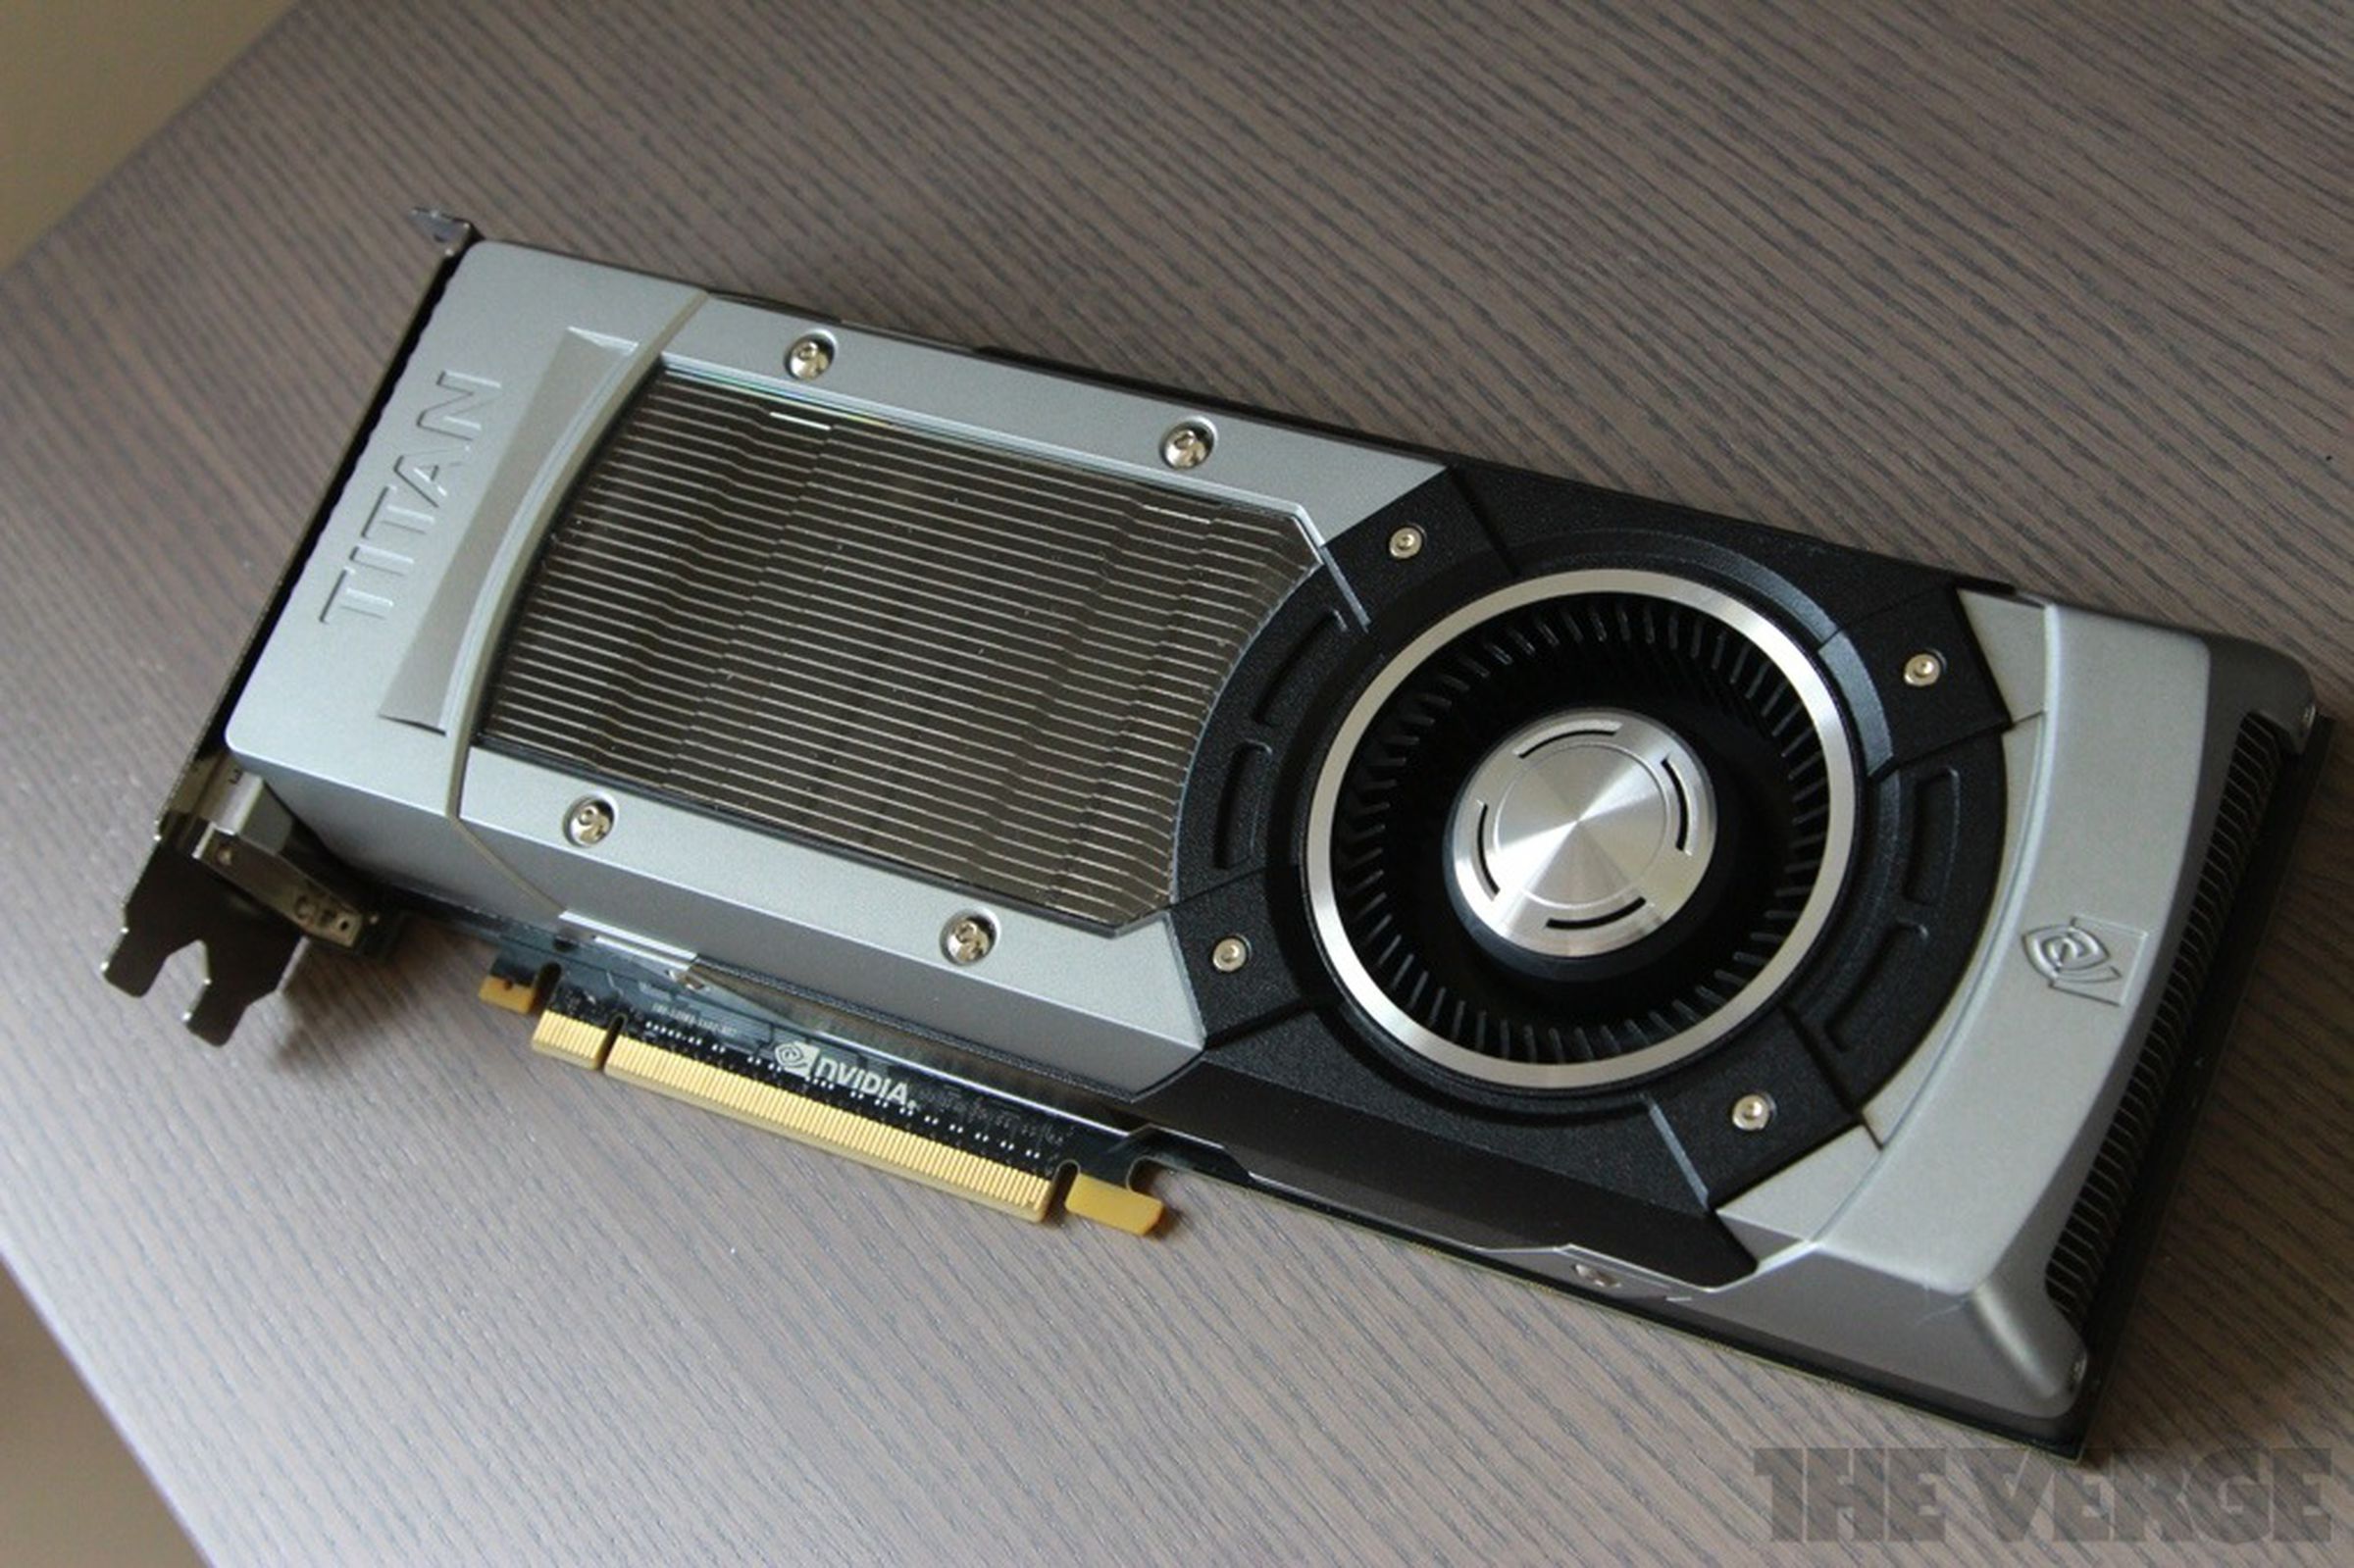 Nvidia GeForce GTX Titan hands-on pictures